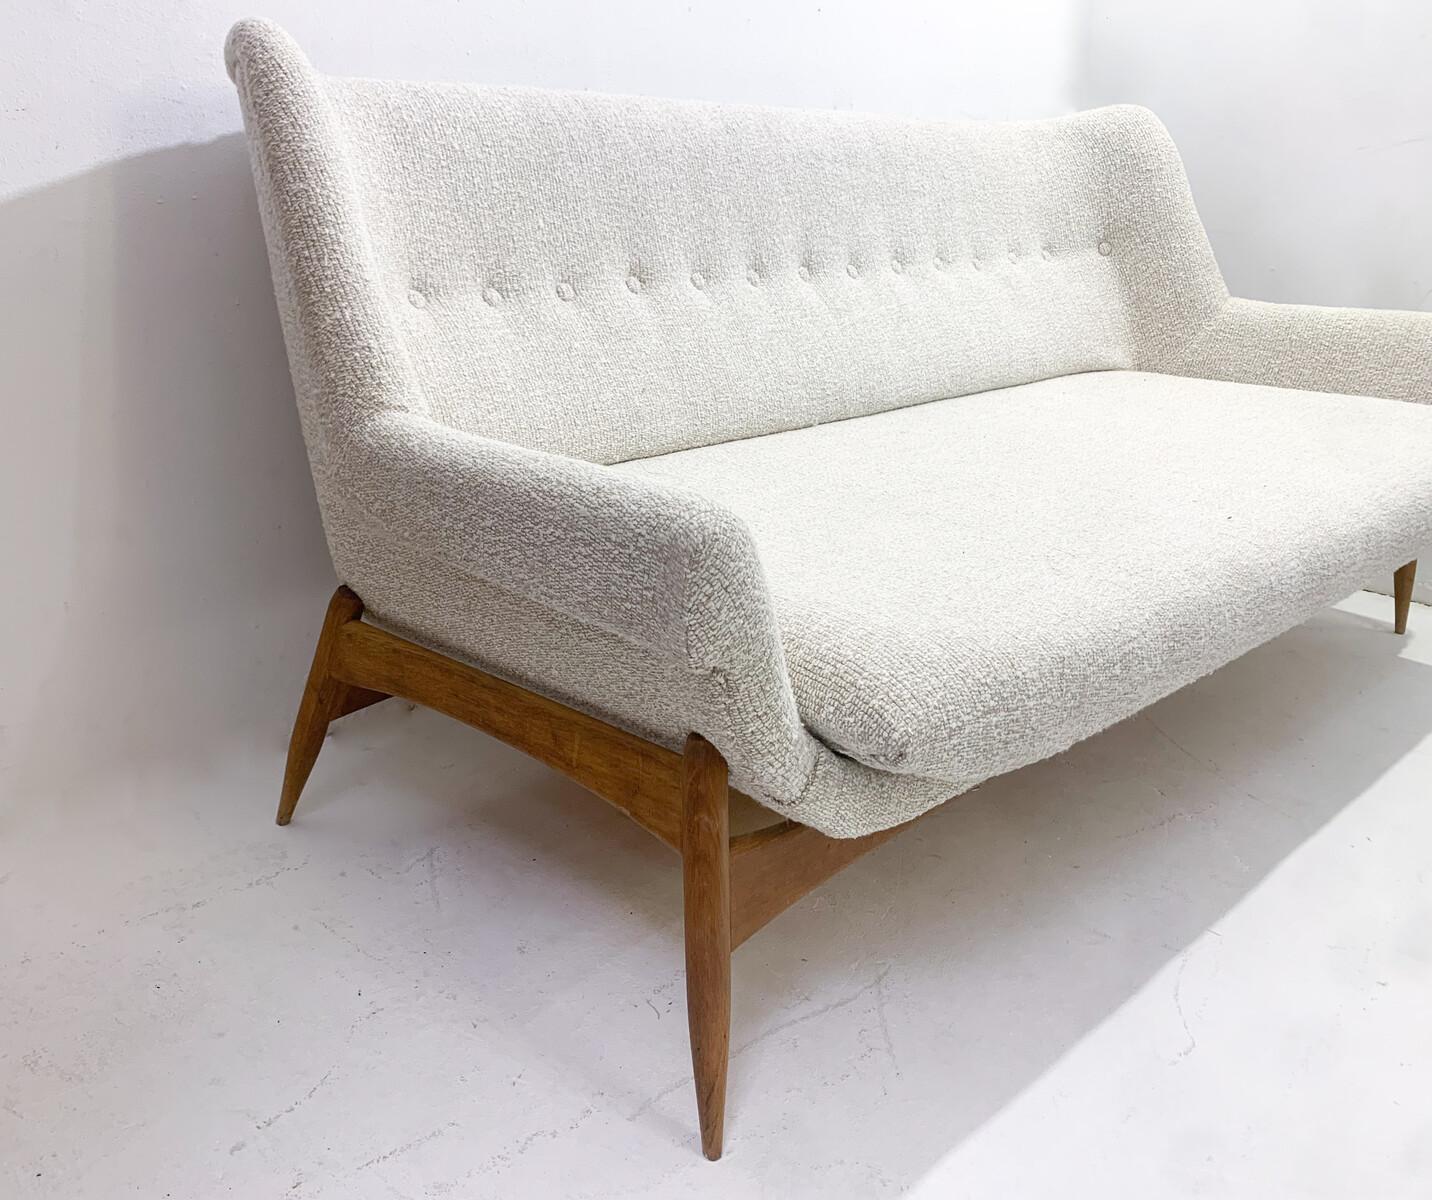 Fabric Mid-Century Modern Sofa by Julia Gaubek, Beige Upholstery, Hungary, 1950s For Sale